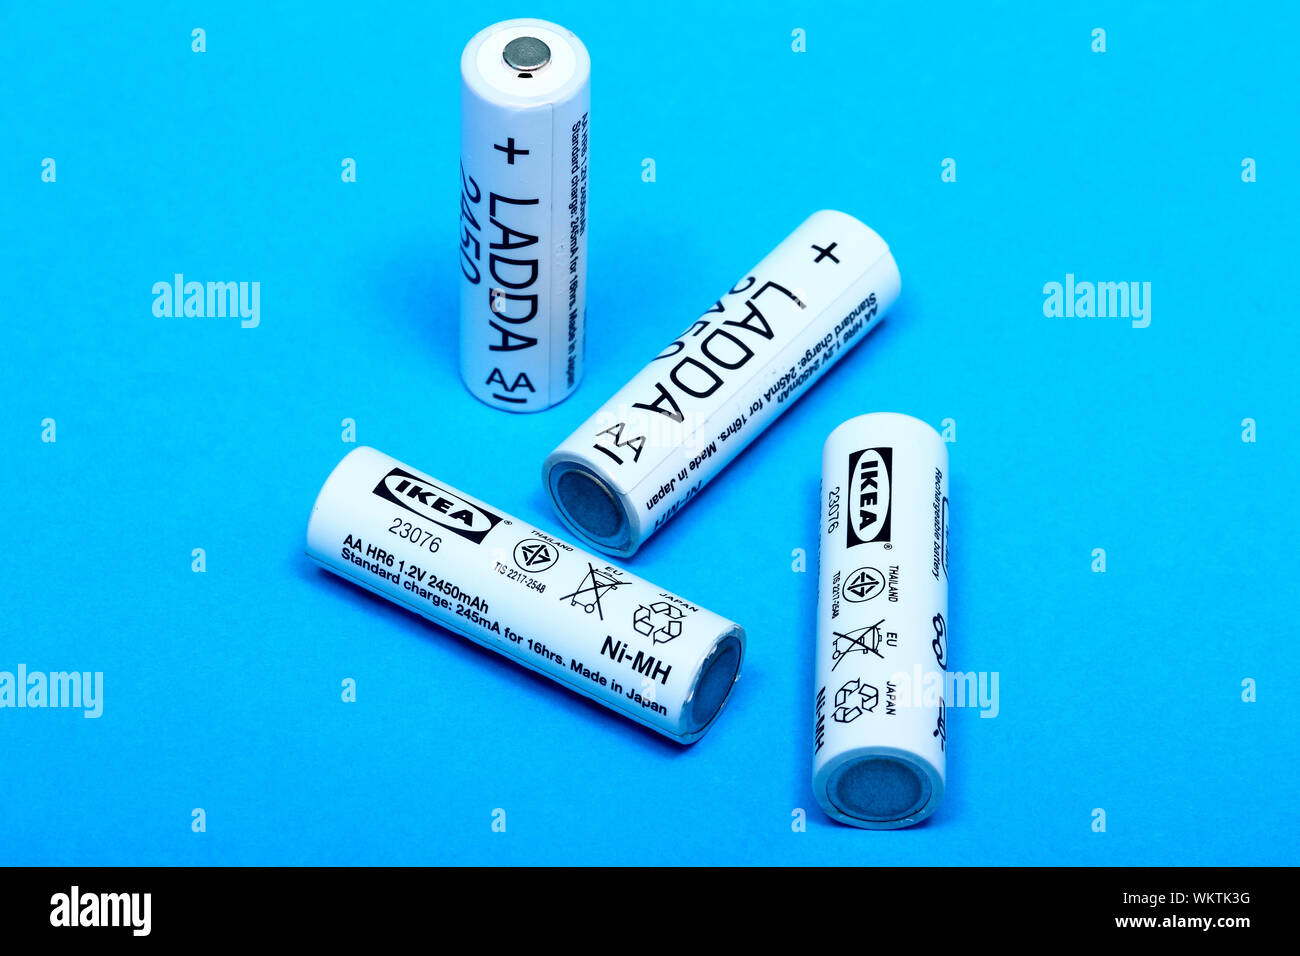 Four Ikea AA 2450 mah rechargeable batteries isolated on a blue background  - Editorial Stock Photo - Alamy